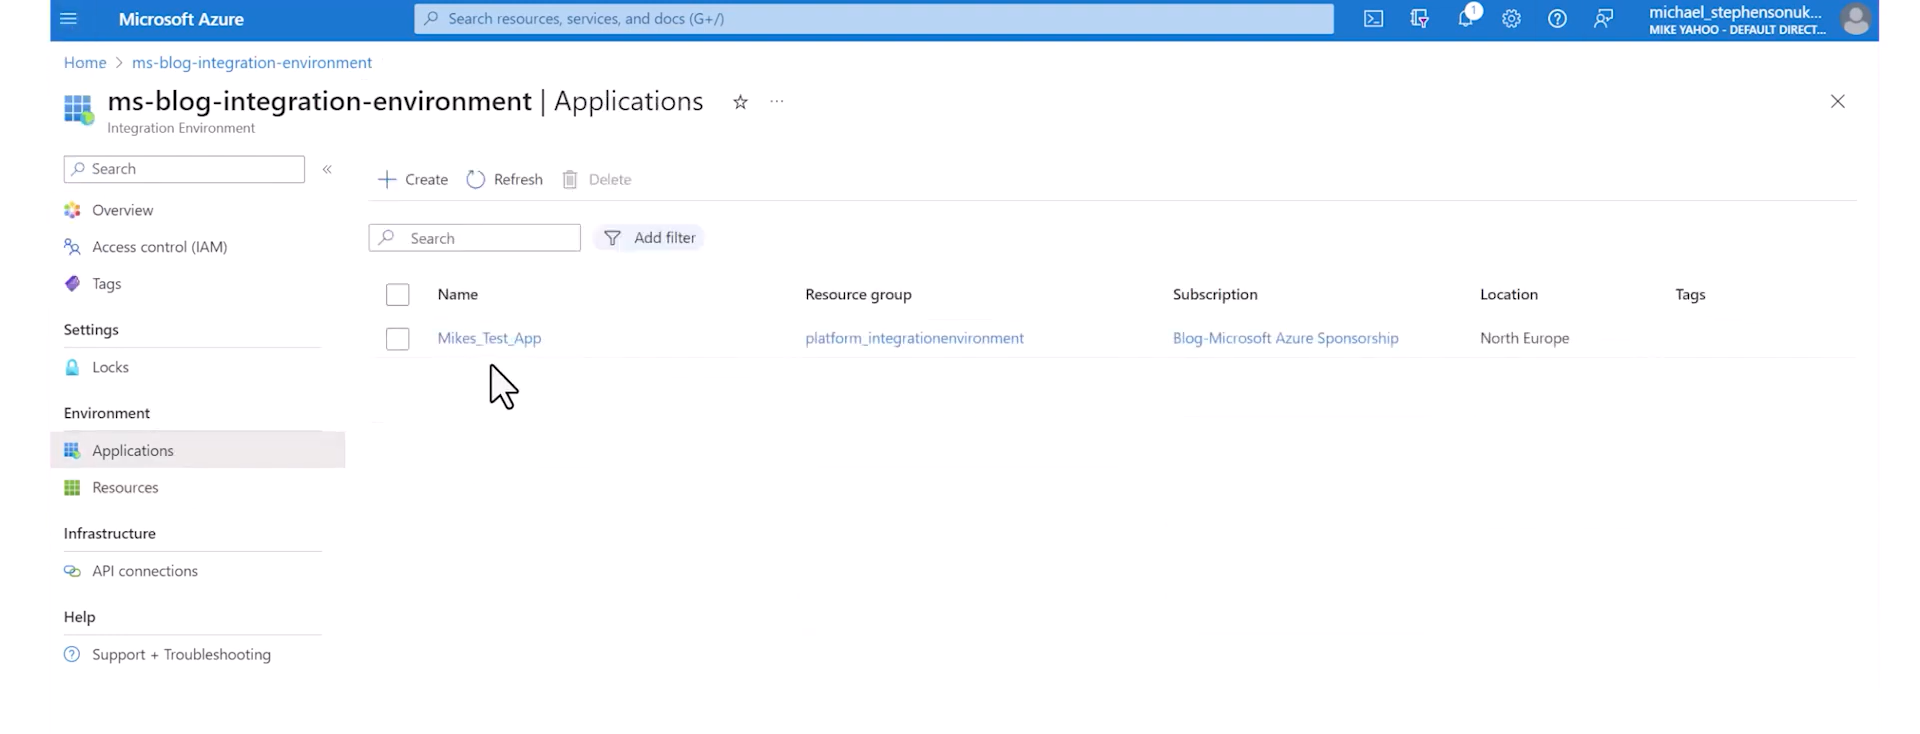 Deploying applications in Azure Integration Environment